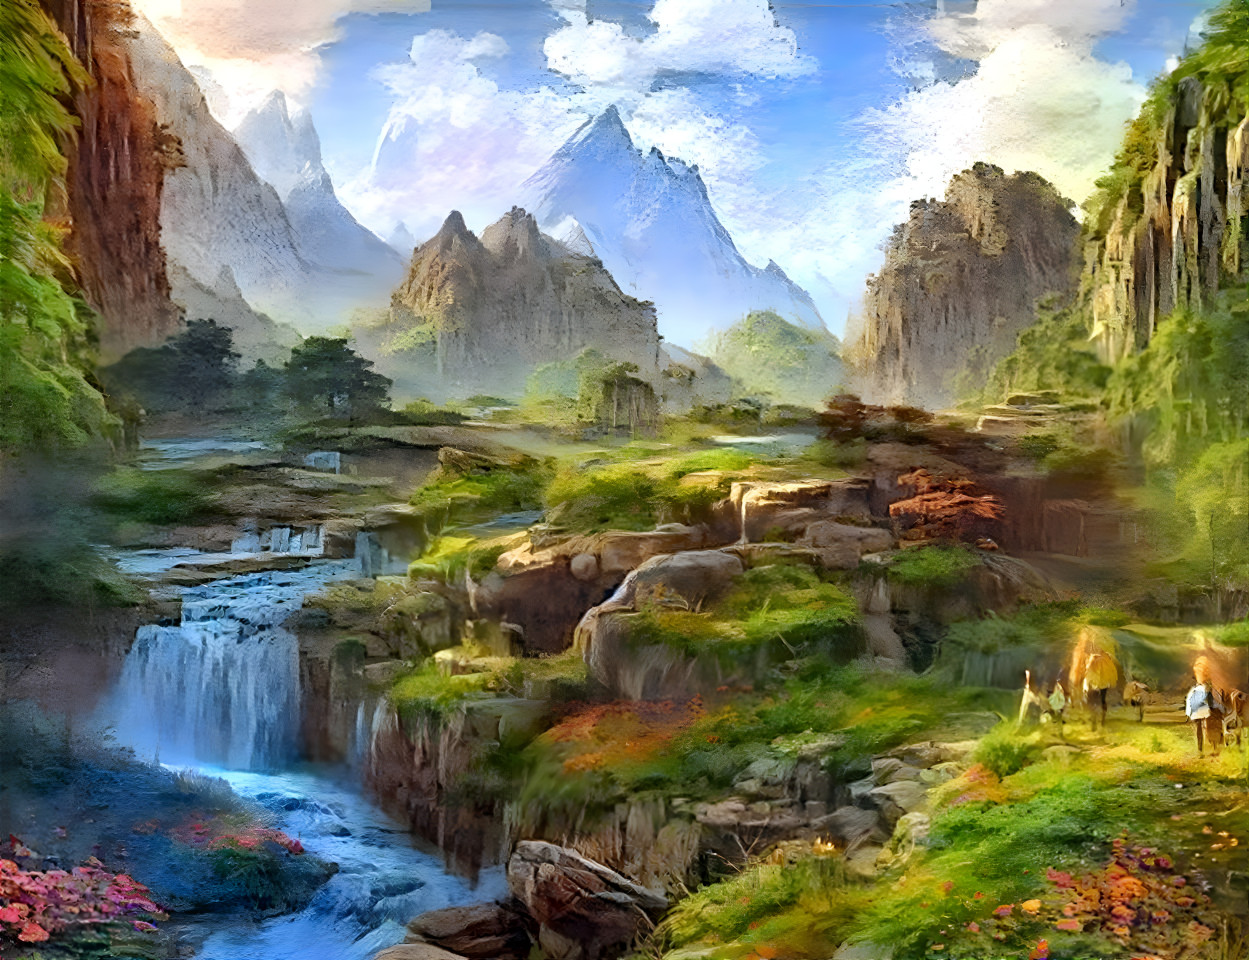 "Wild Land" - by Unreal.